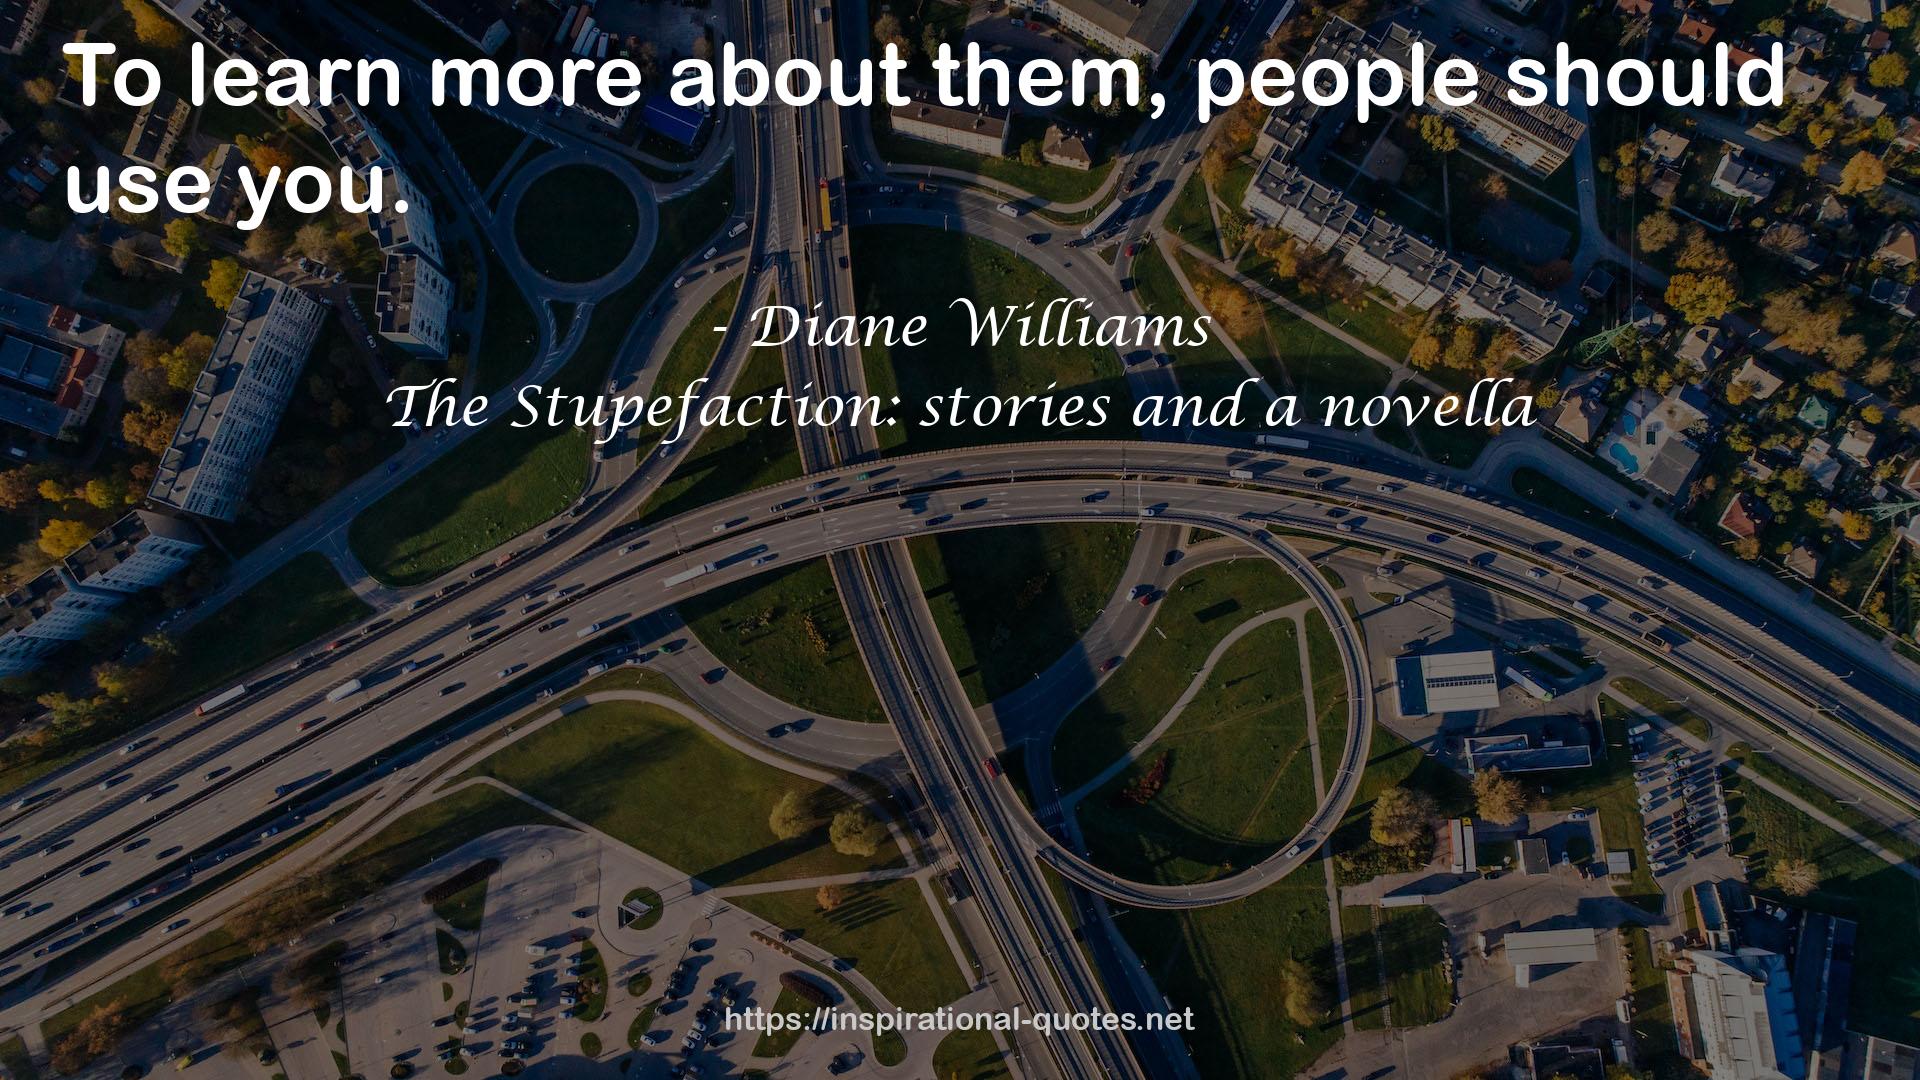 The Stupefaction: stories and a novella QUOTES